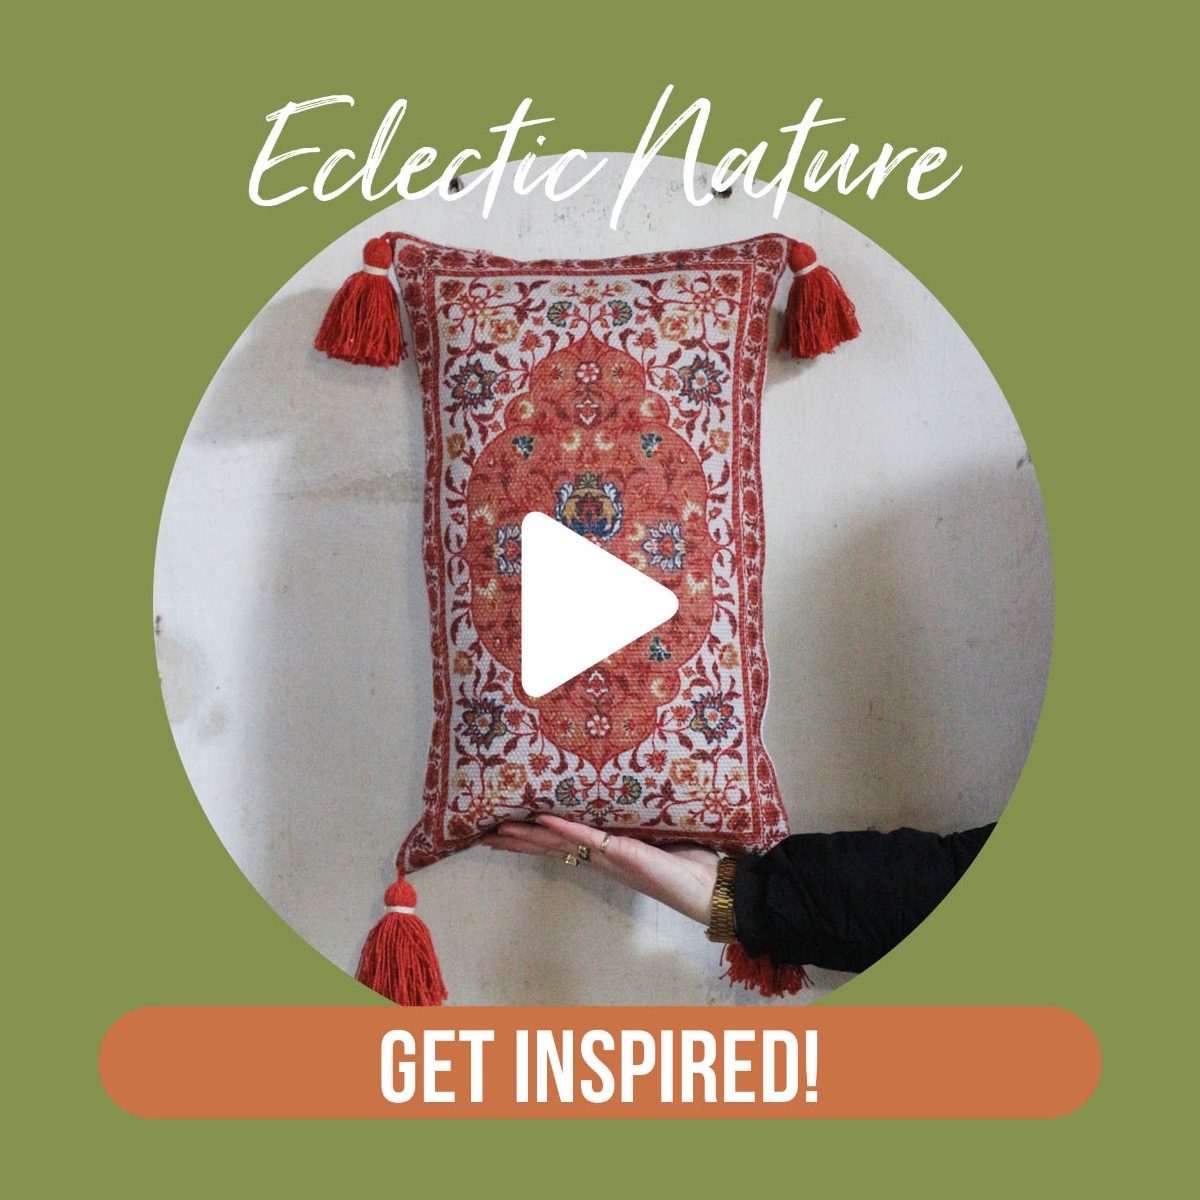 Eclectic Nature video